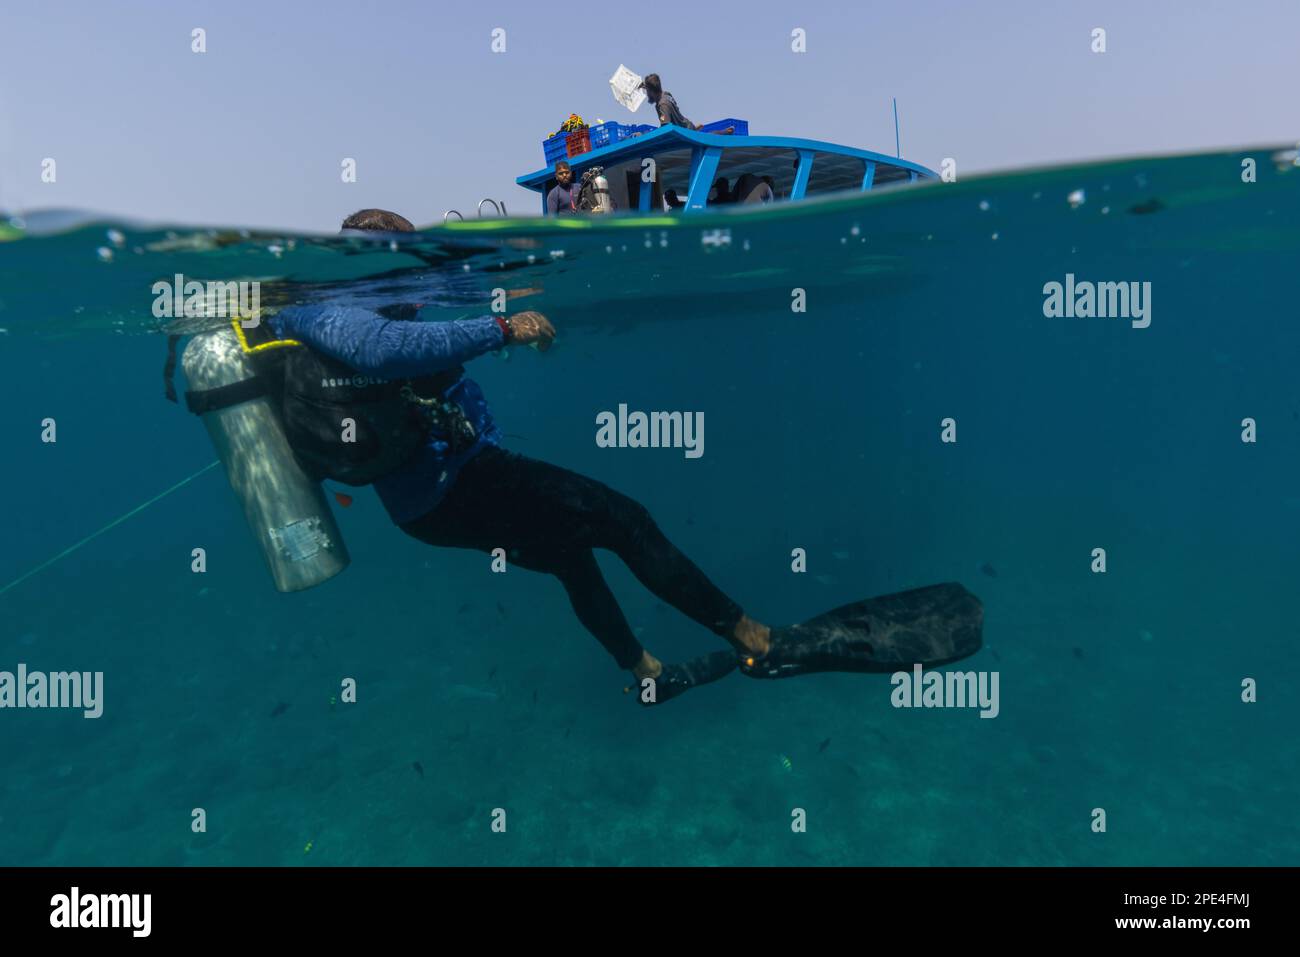 A Scuba Diver is about to descend underwater after jumping off from the ...